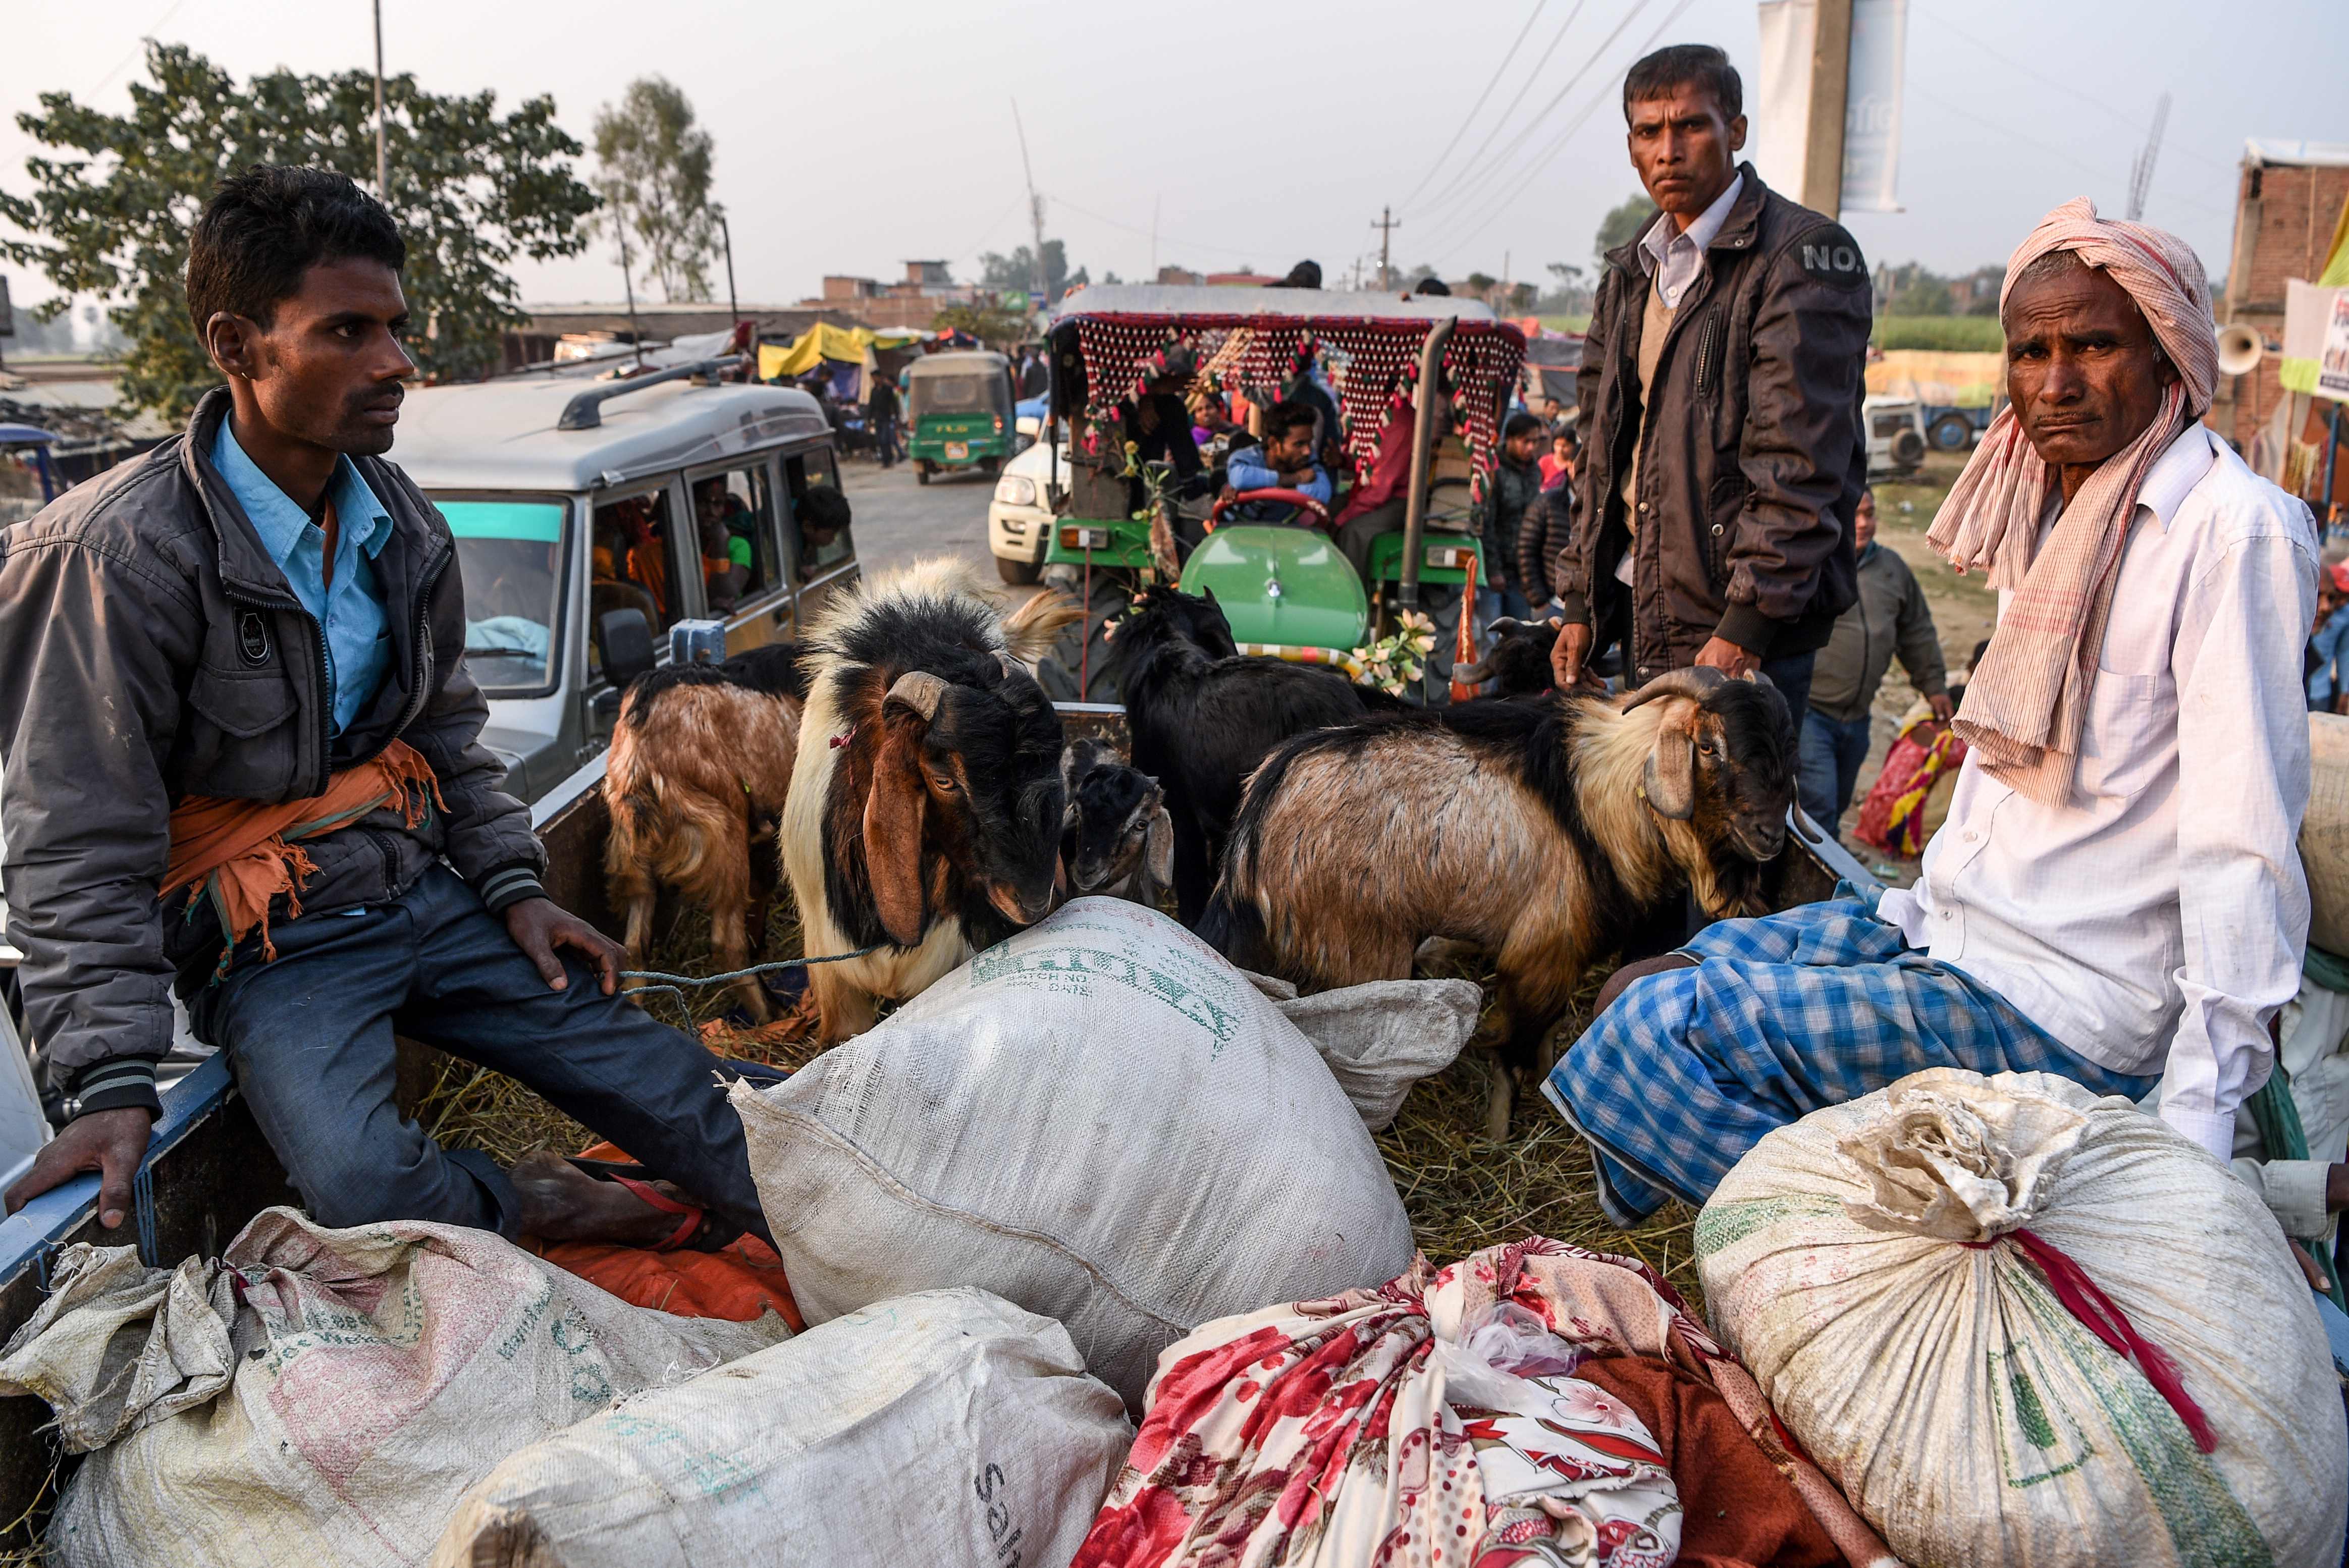 Hindu devotees travel with goats in a vehicle ahead of Gadhimai Festival in Baryarpur, 160 kms south of the Kathmandu, on December 2, 2019. - Thousands of Hindu worshippers are flocking to a village in southern Nepal on December 2, defying court orders and calls by animal activists, in preparation for the world's biggest animal sacrifice. (Photo by PRAKASH MATHEMA / AFP)